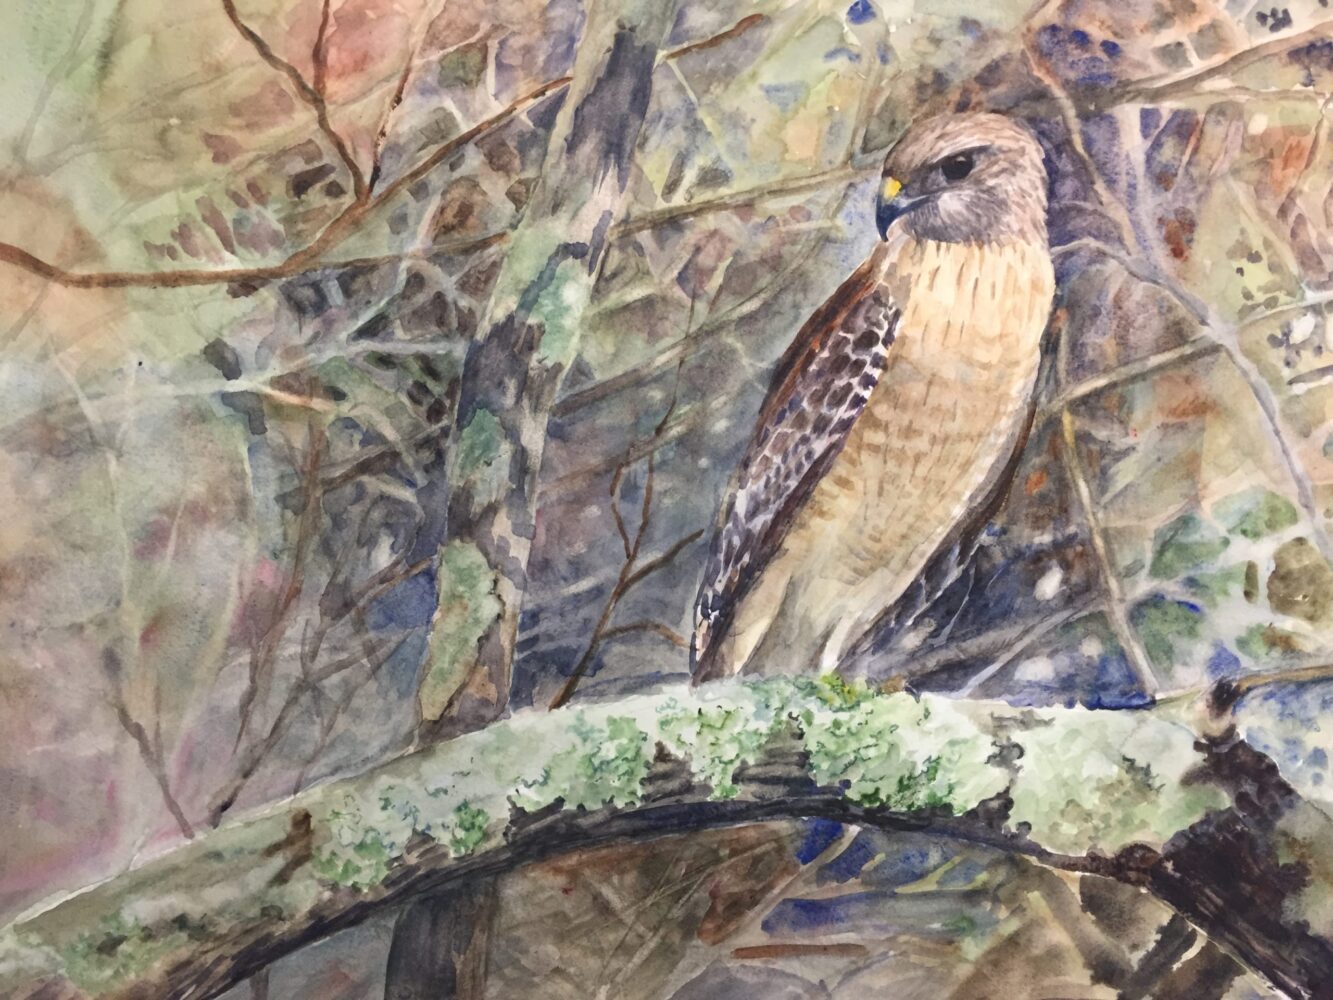 Hawk – On Watch by Frances Topping, Watercolor